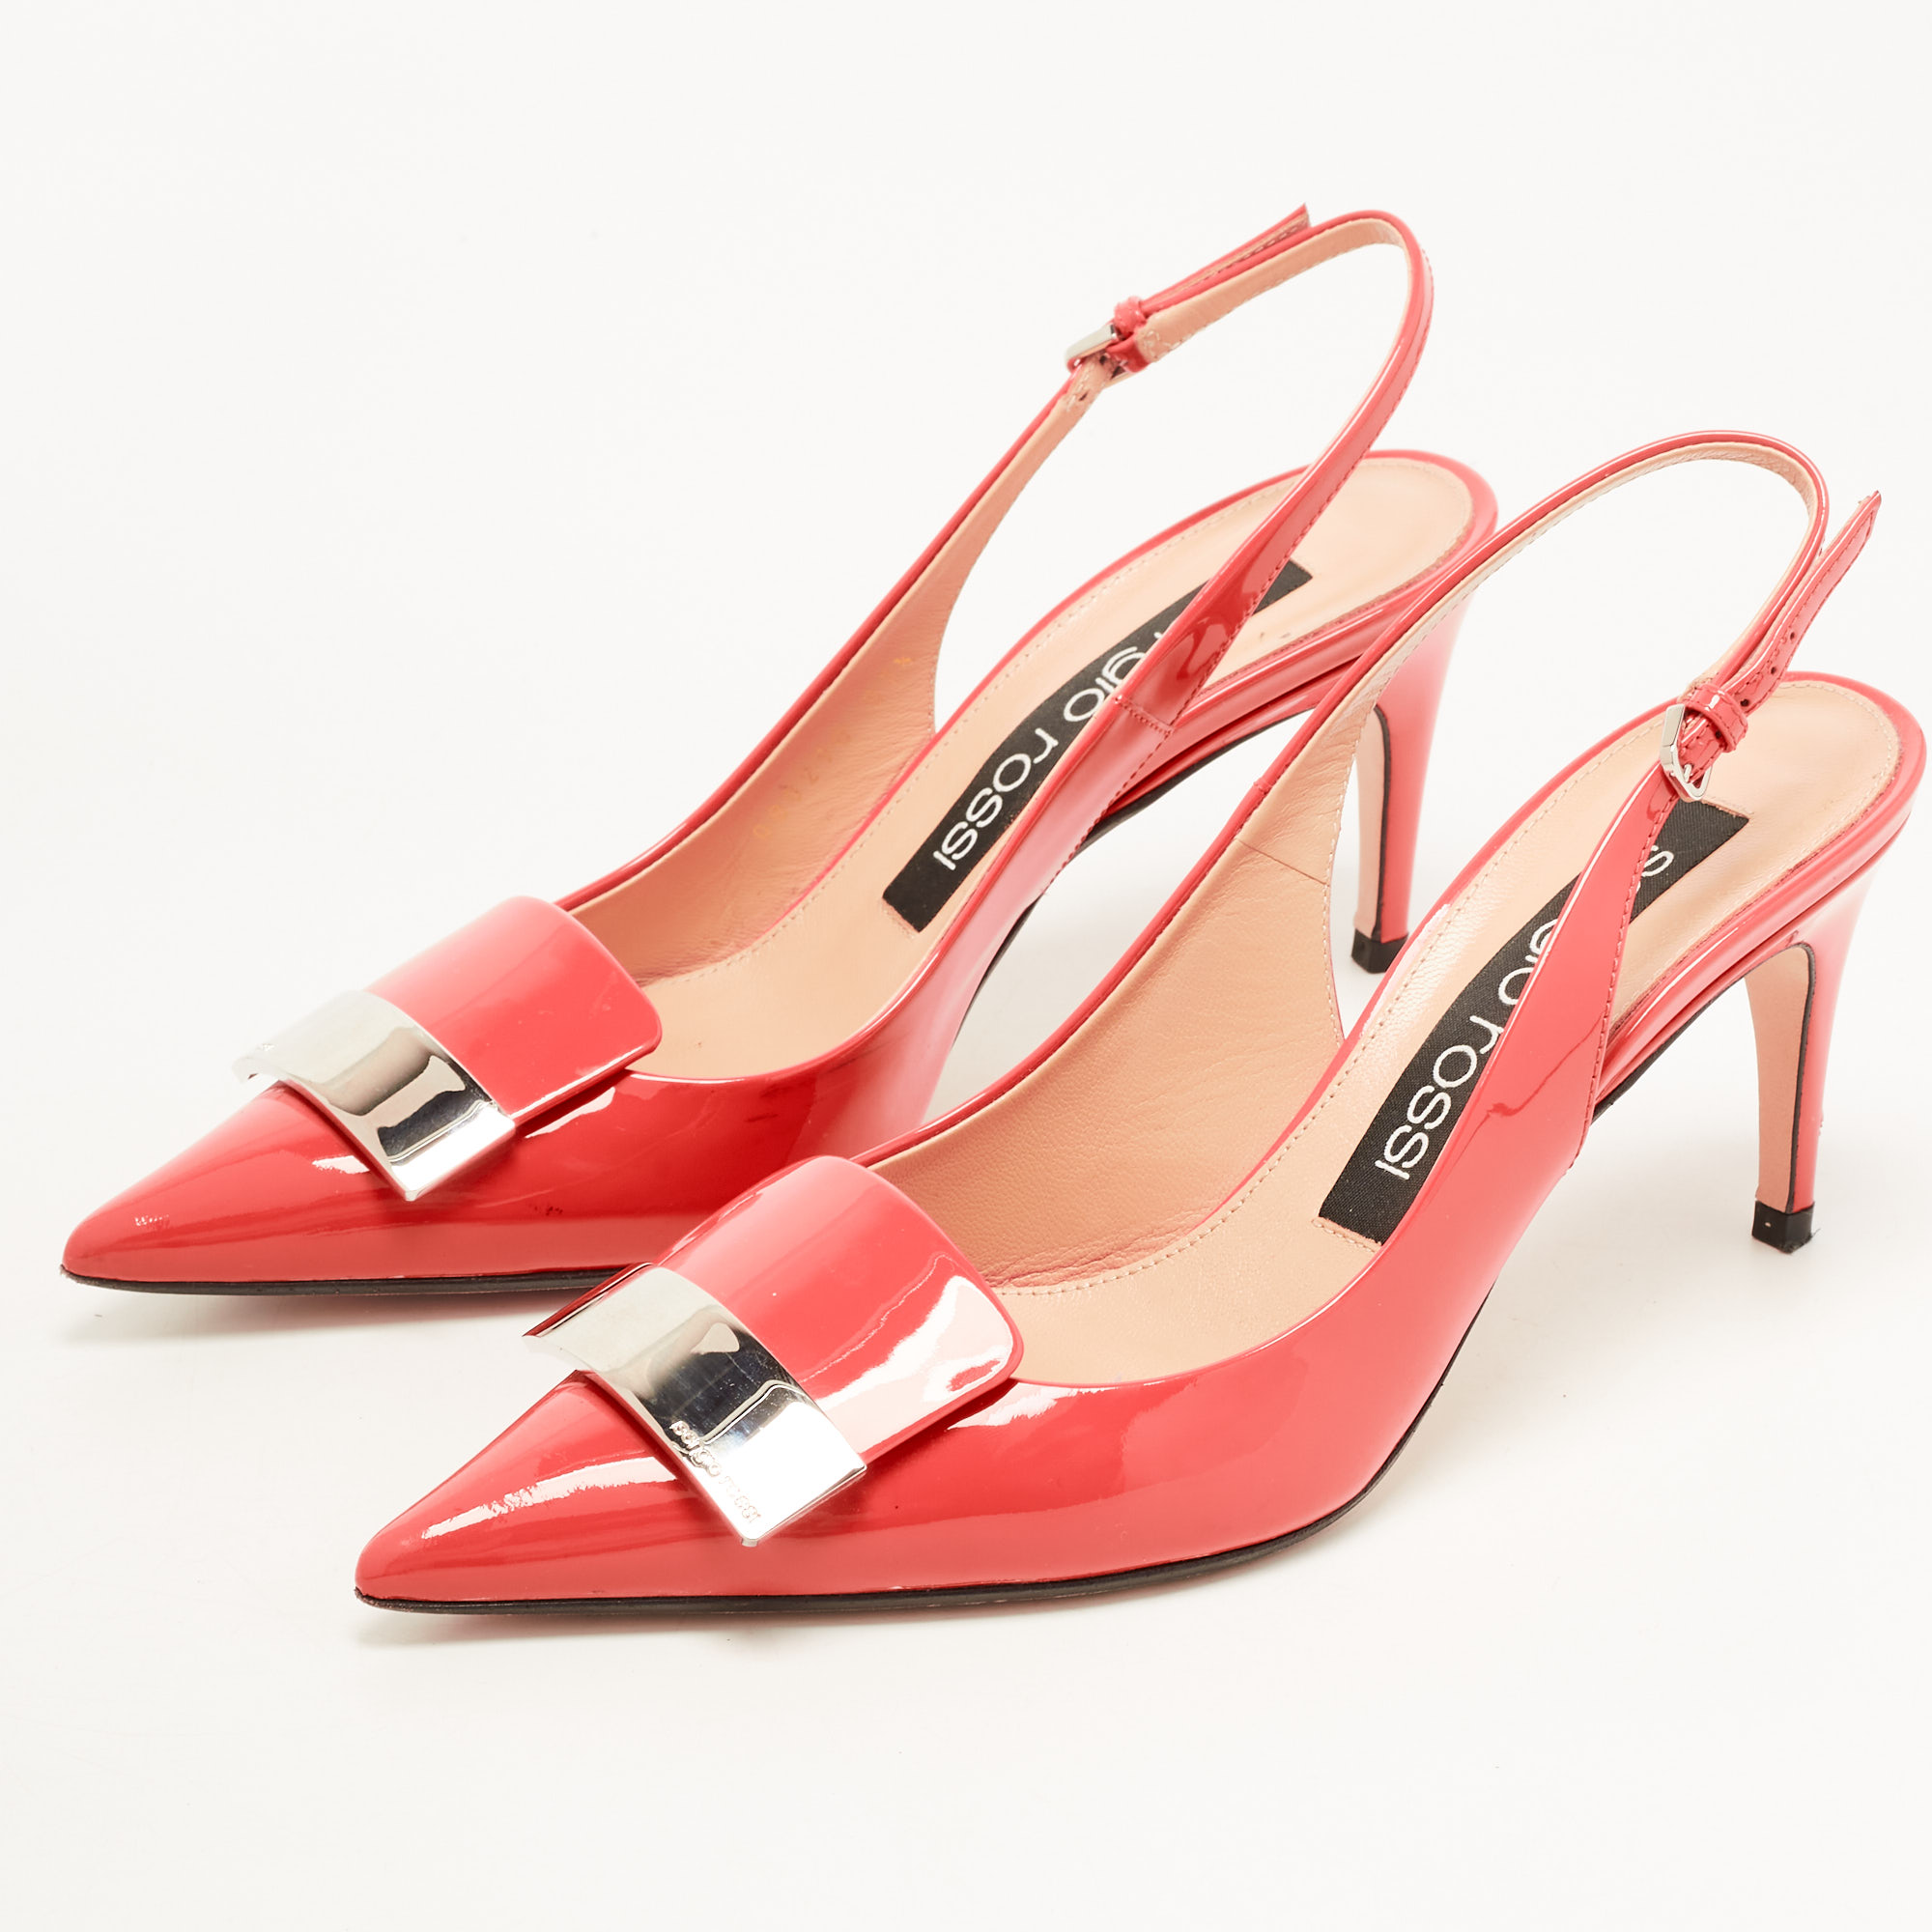 

Sergio Rossi Coral Pink Patent Leather SR1 Slingback Pumps Size